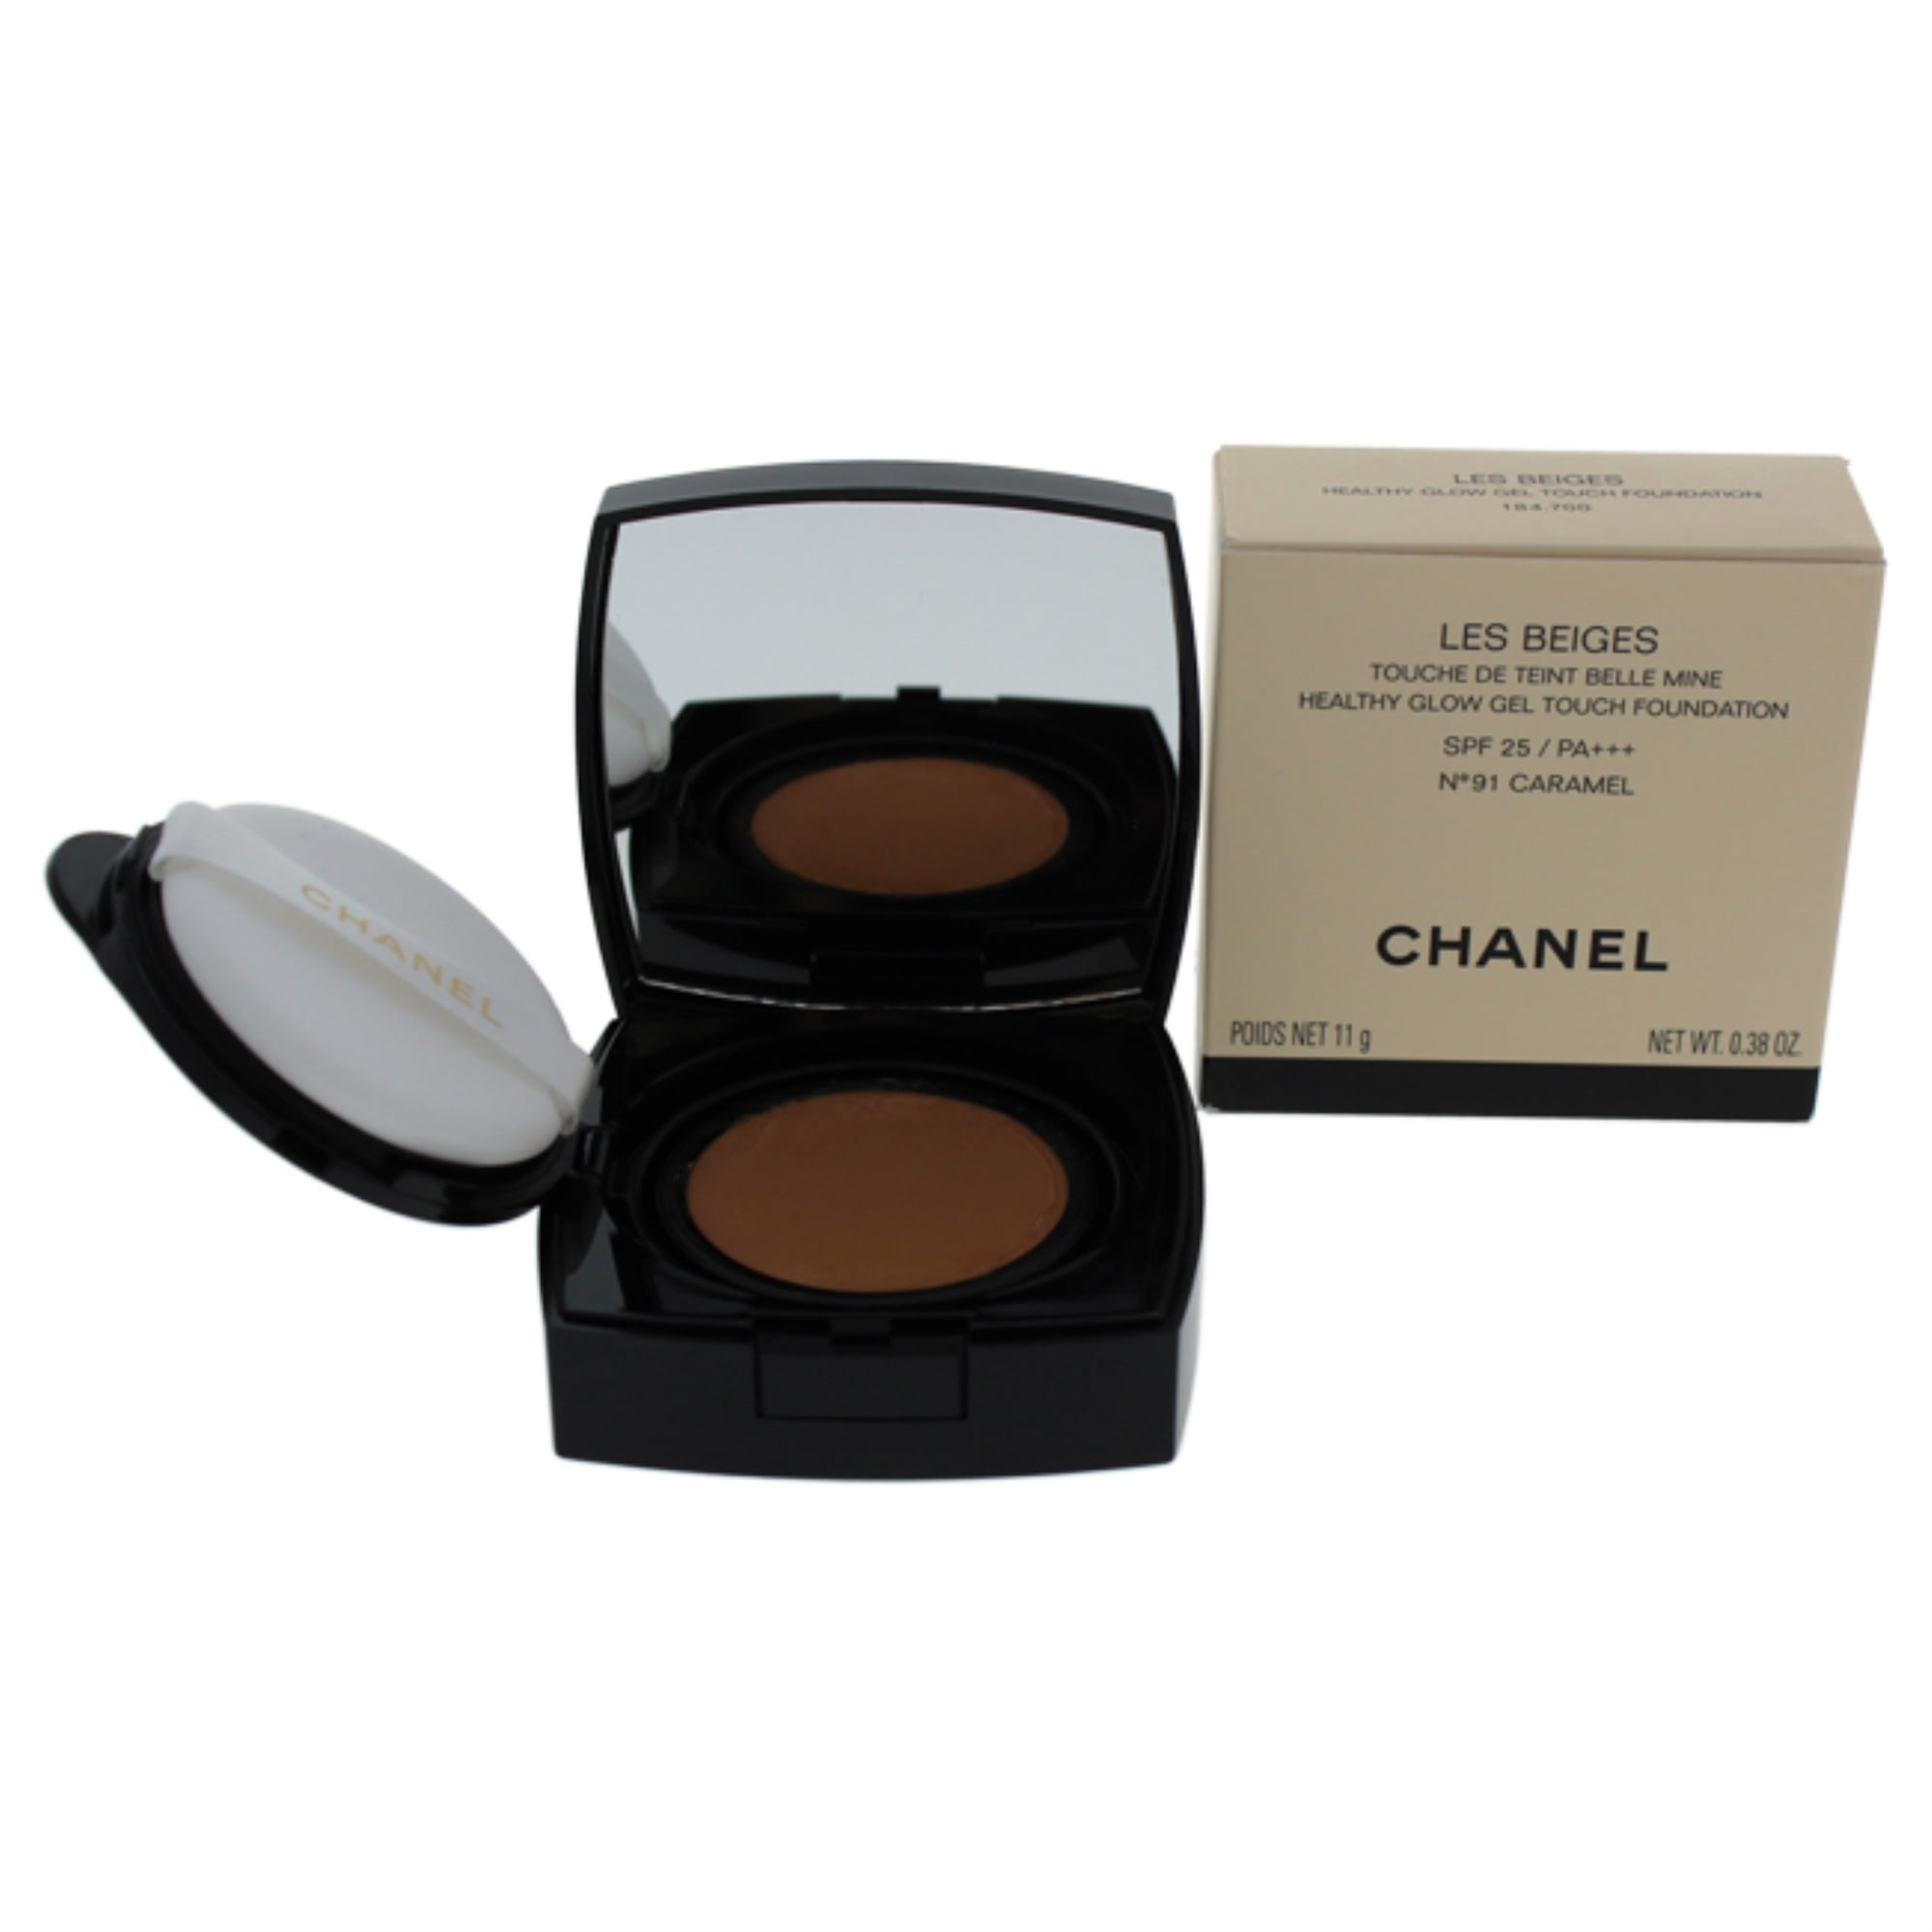 CHANEL Les Beiges Healthy Glow Gel Touch Foundation SPF 30/ PA+++ ~ BR12 